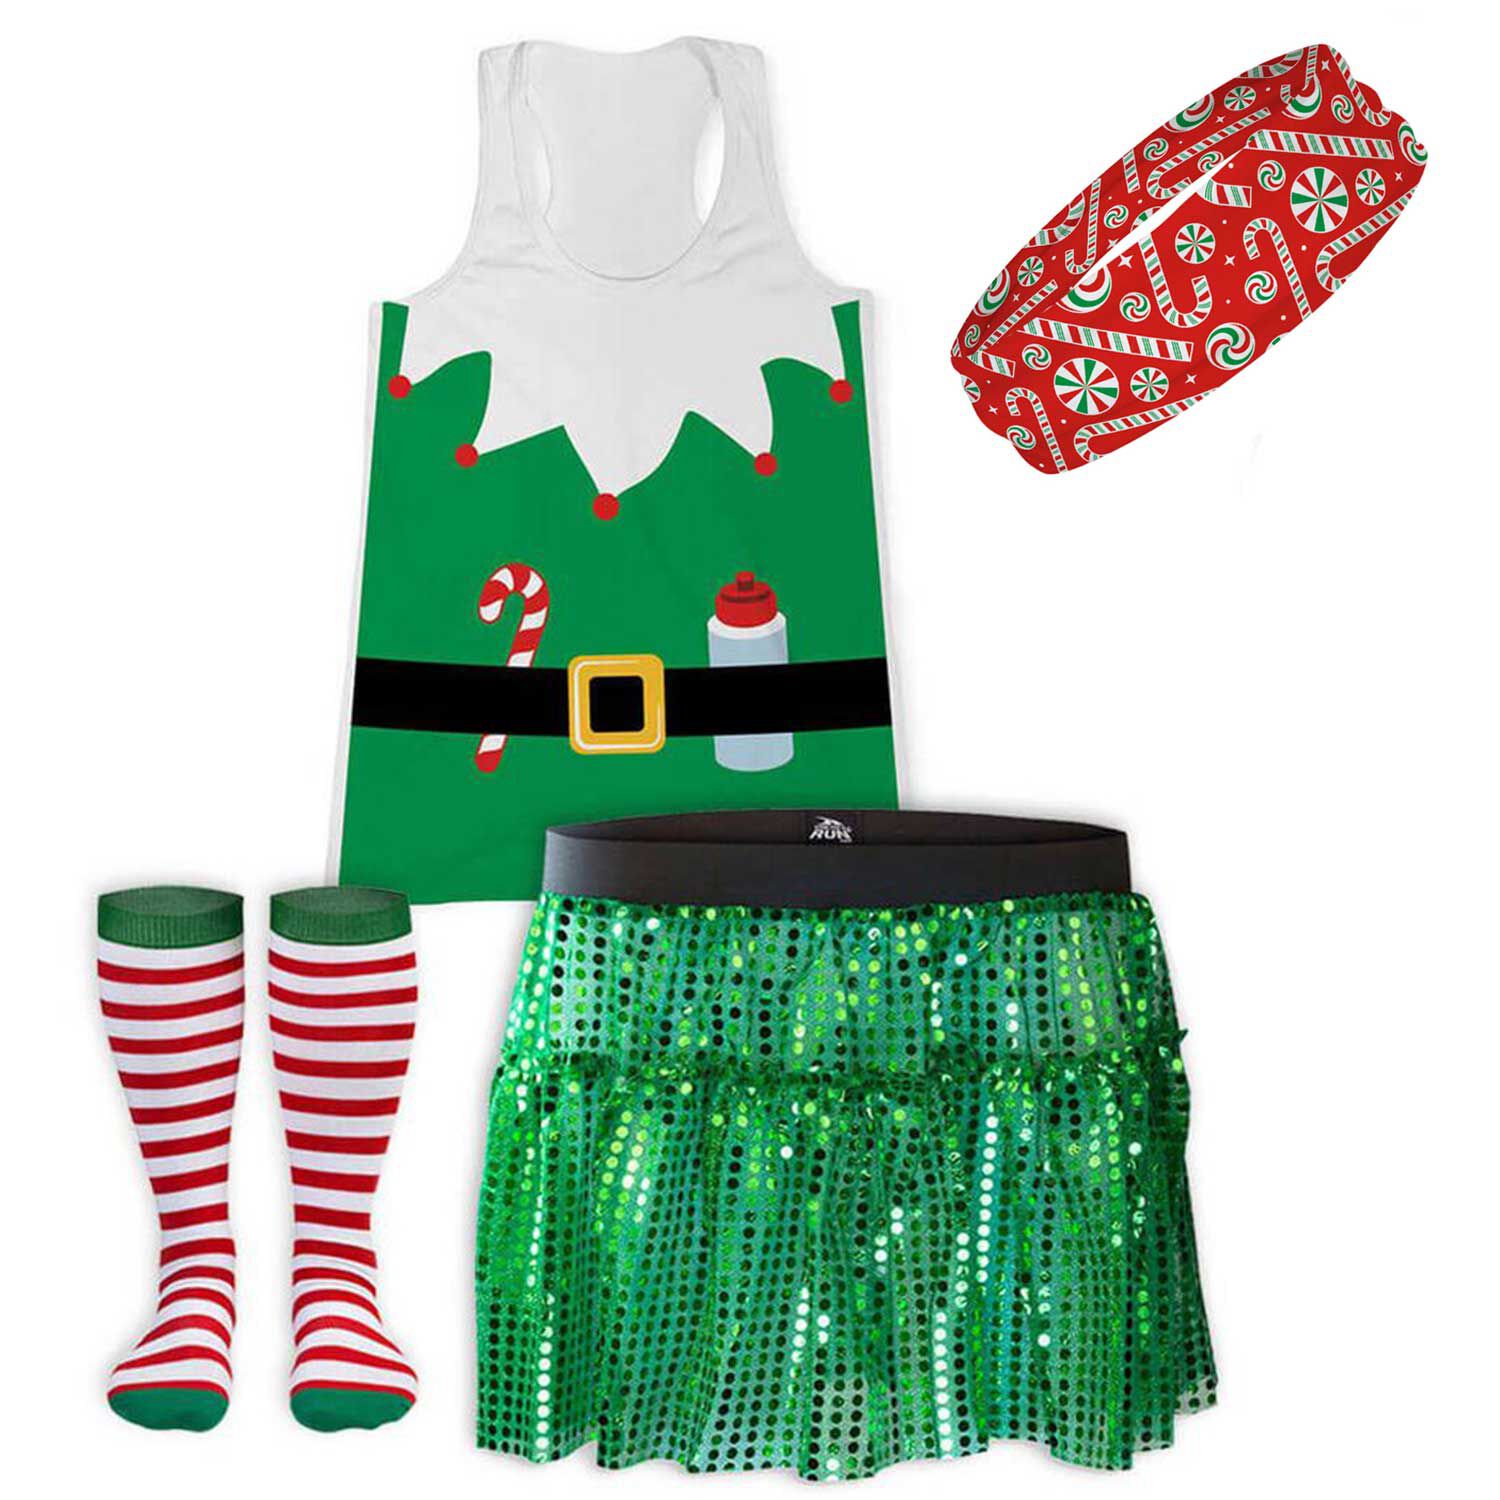 Sequined Elf Tutu Gone For a Run Holiday Running Costume Skirt 